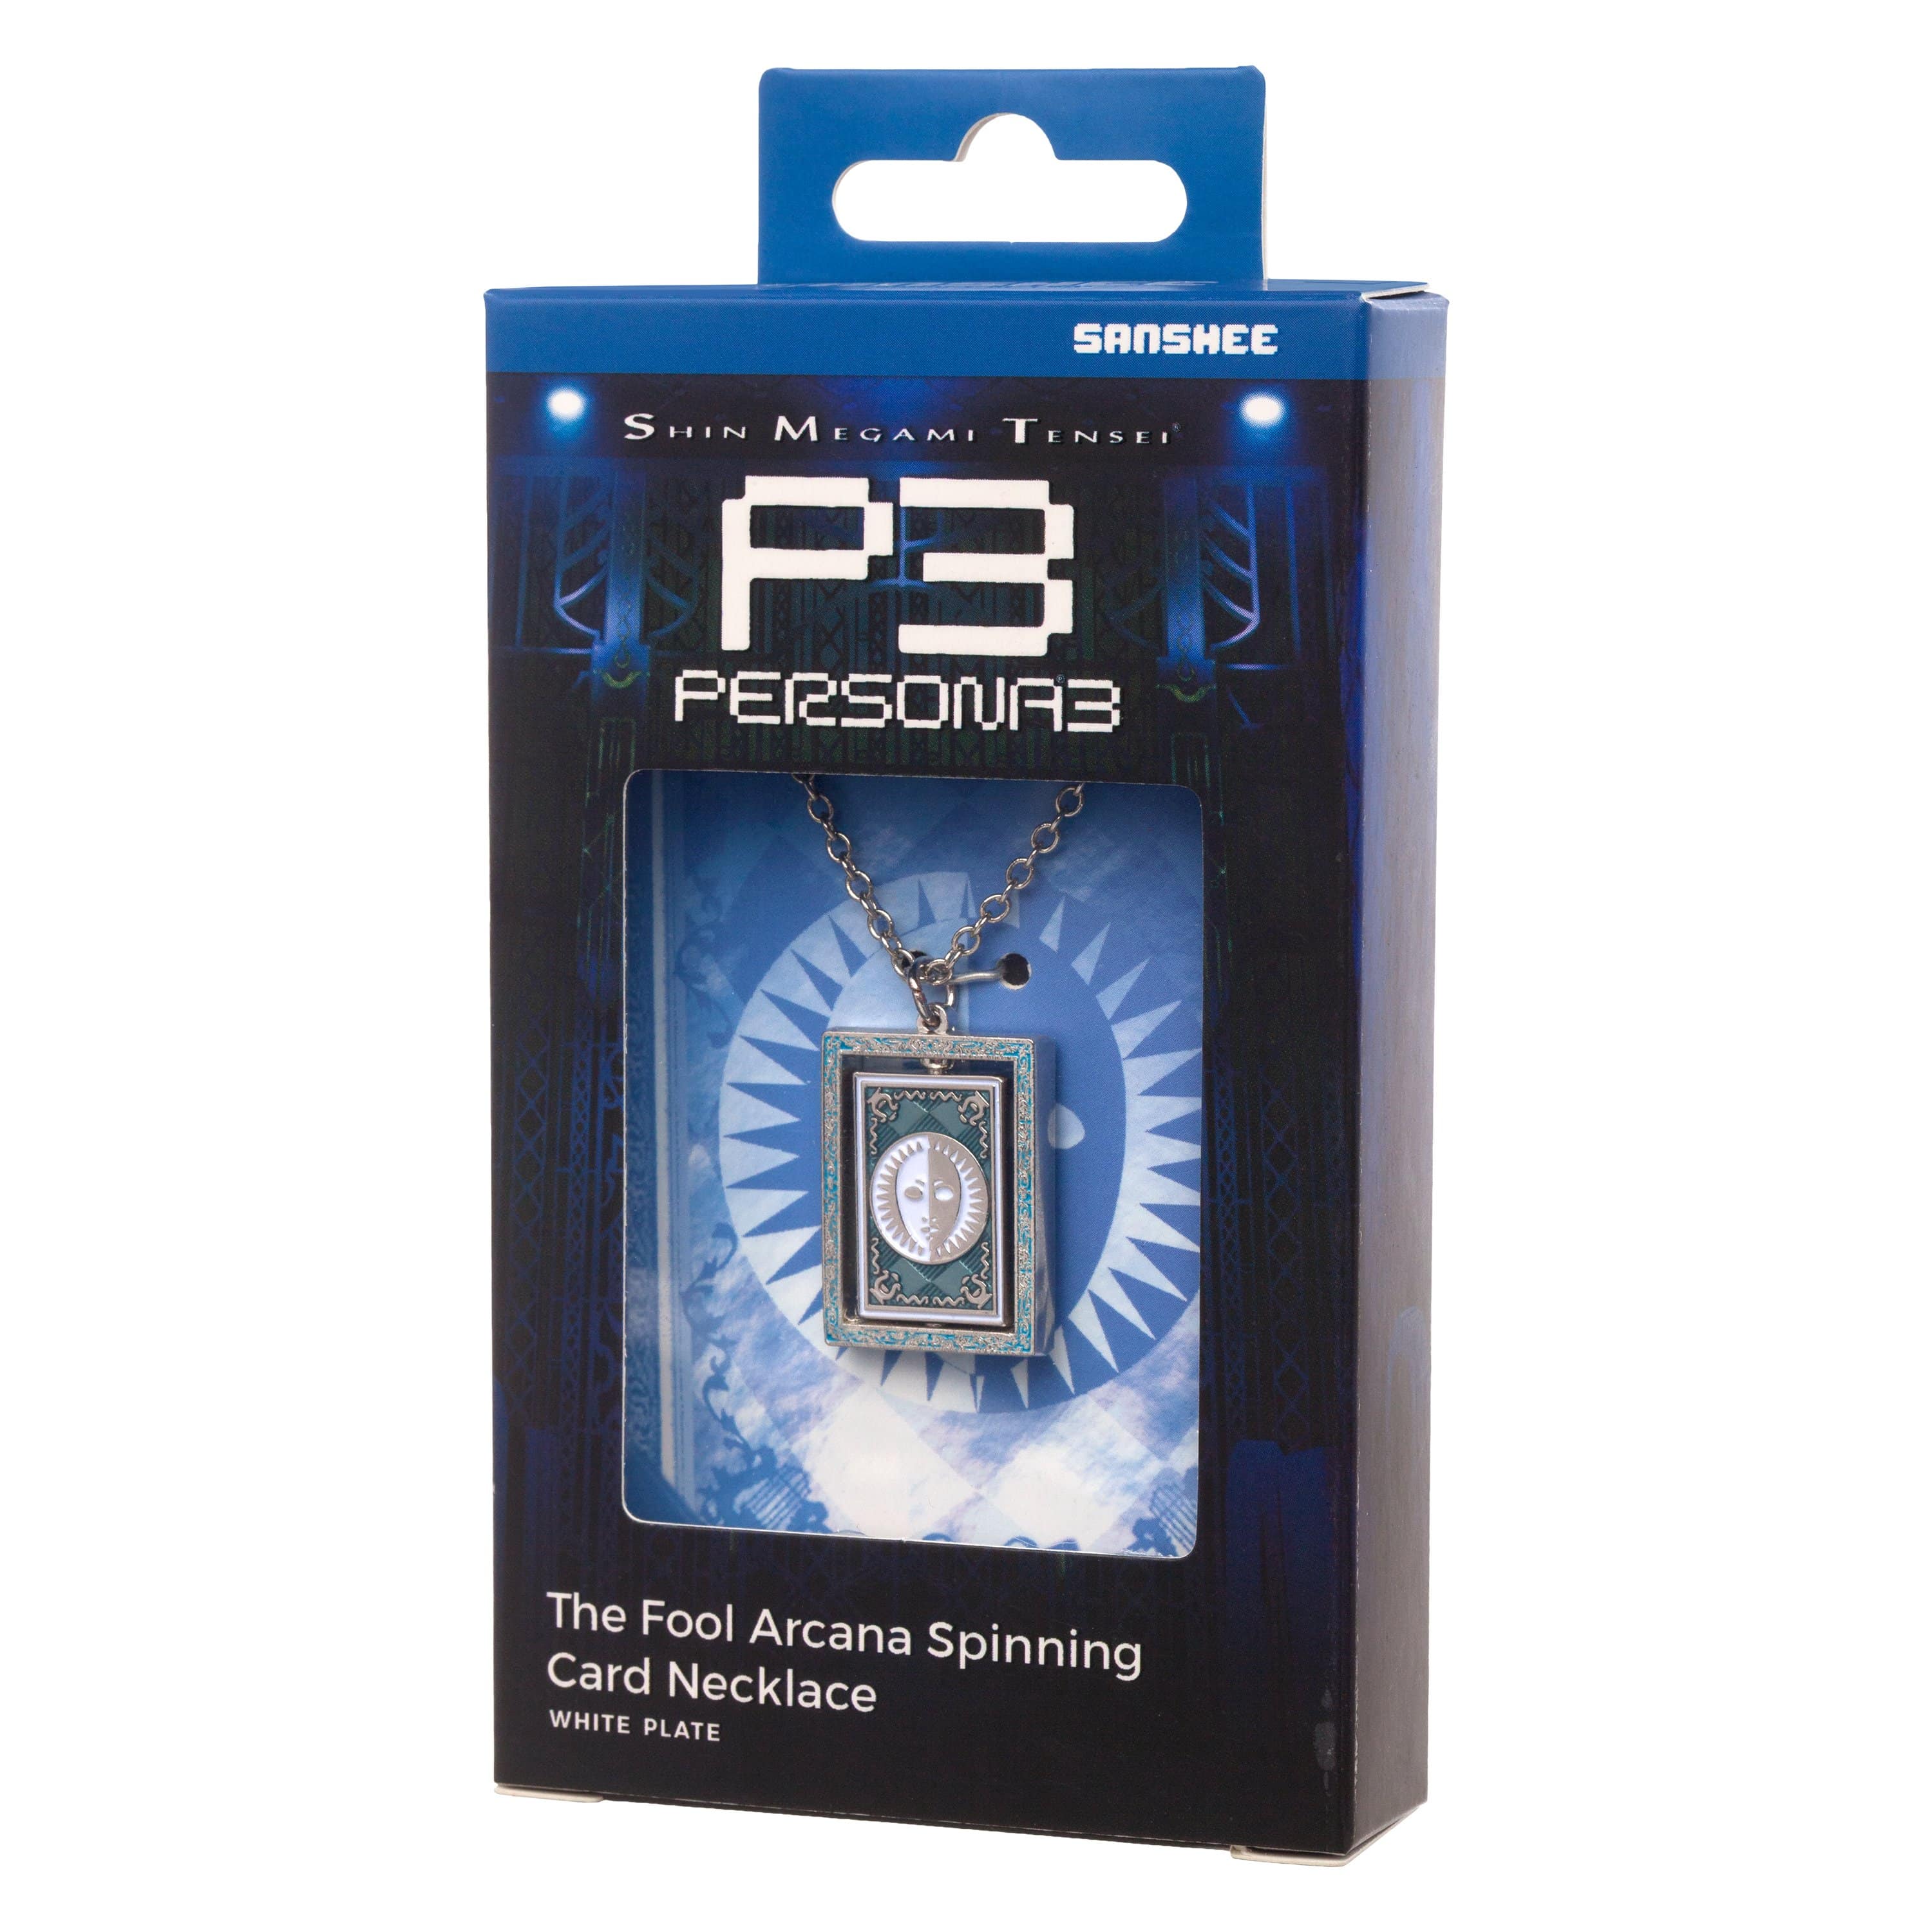 Persona 3 - Fool Arcana Spinning Necklace